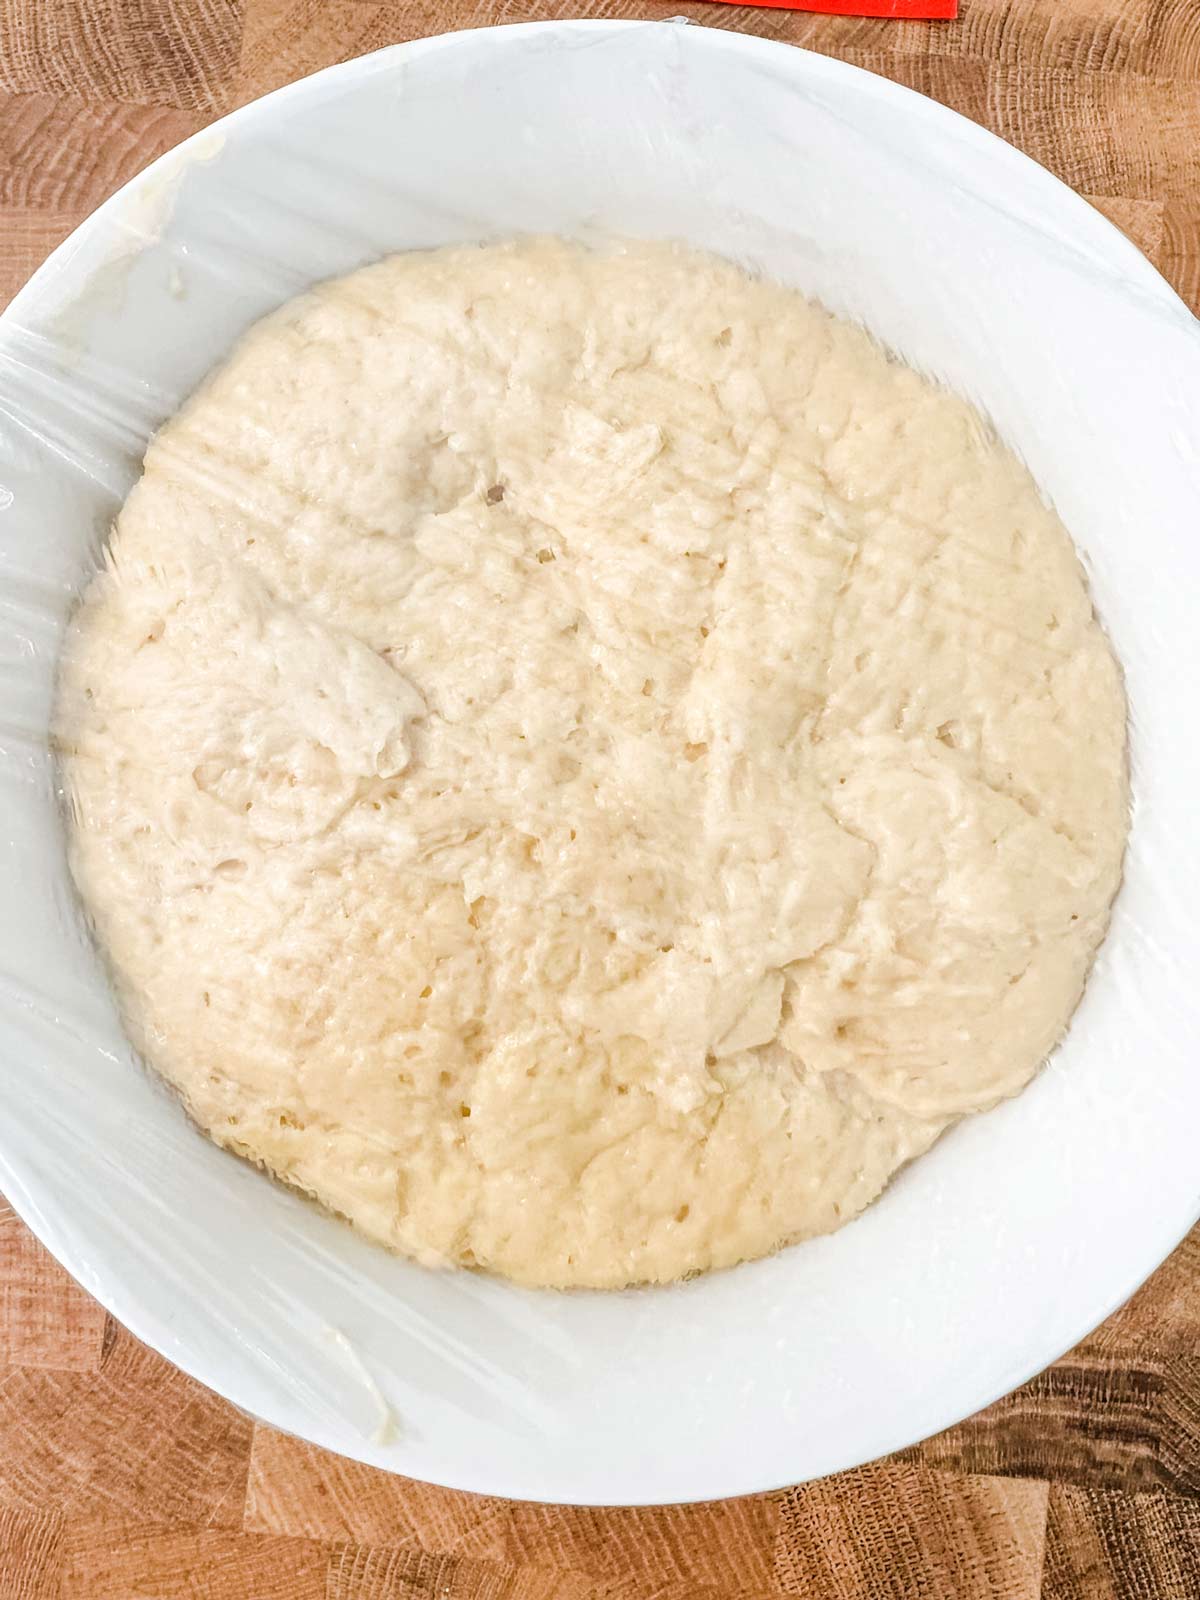 A white bowl with bread dough that has risen in the refrigerator.